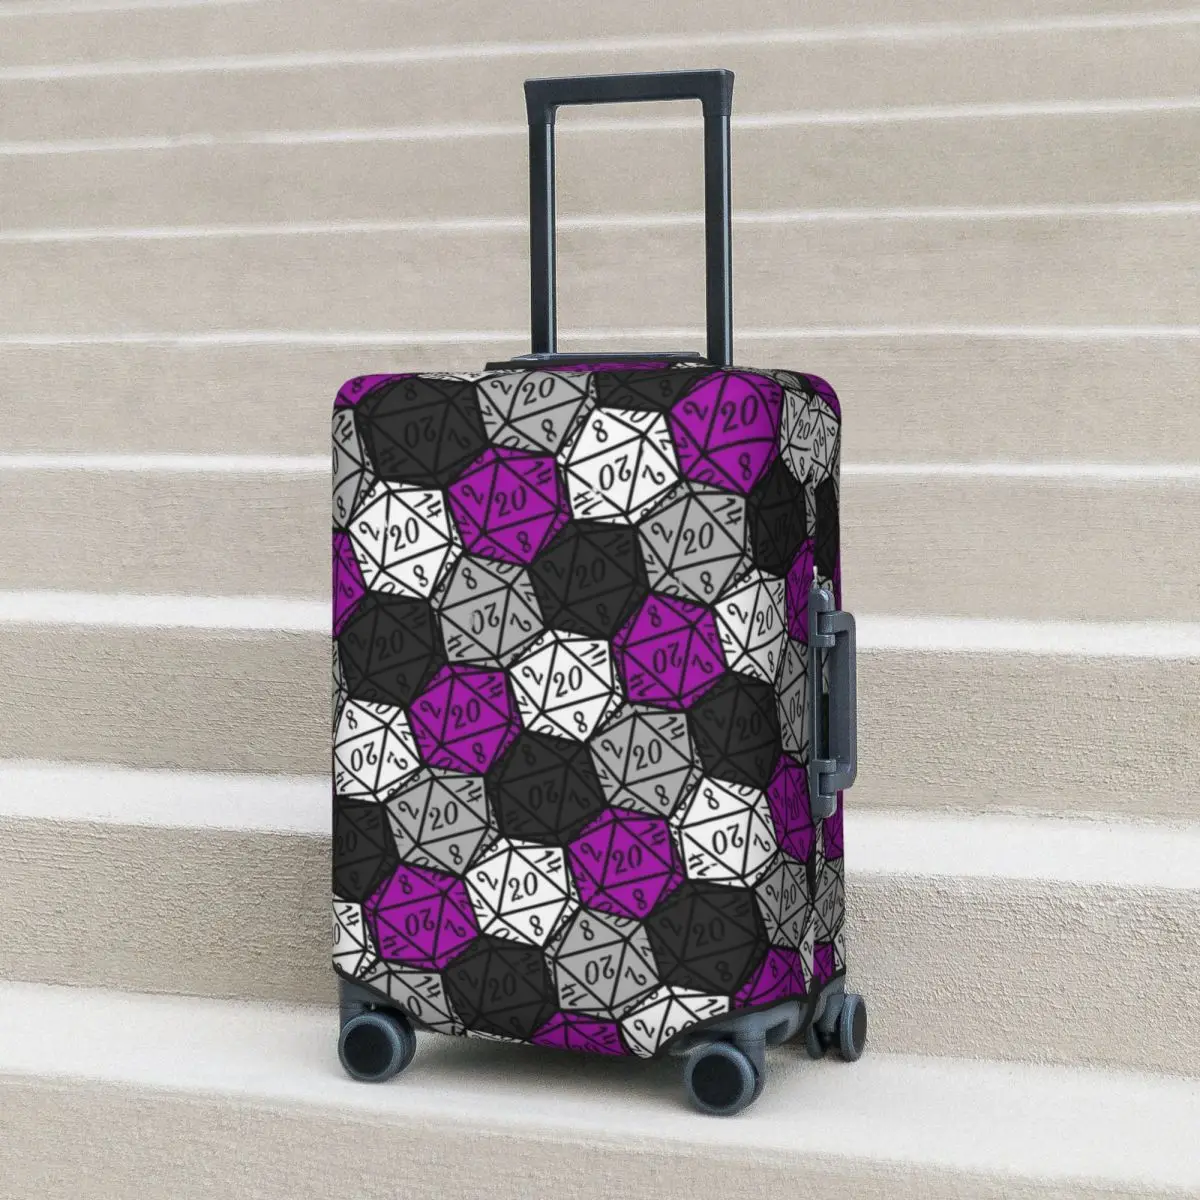 

Asexual Pride Dice Suitcase Cover Abstract Geometric Cruise Trip Vacation Strectch Luggage Case Protector Christmas Gift